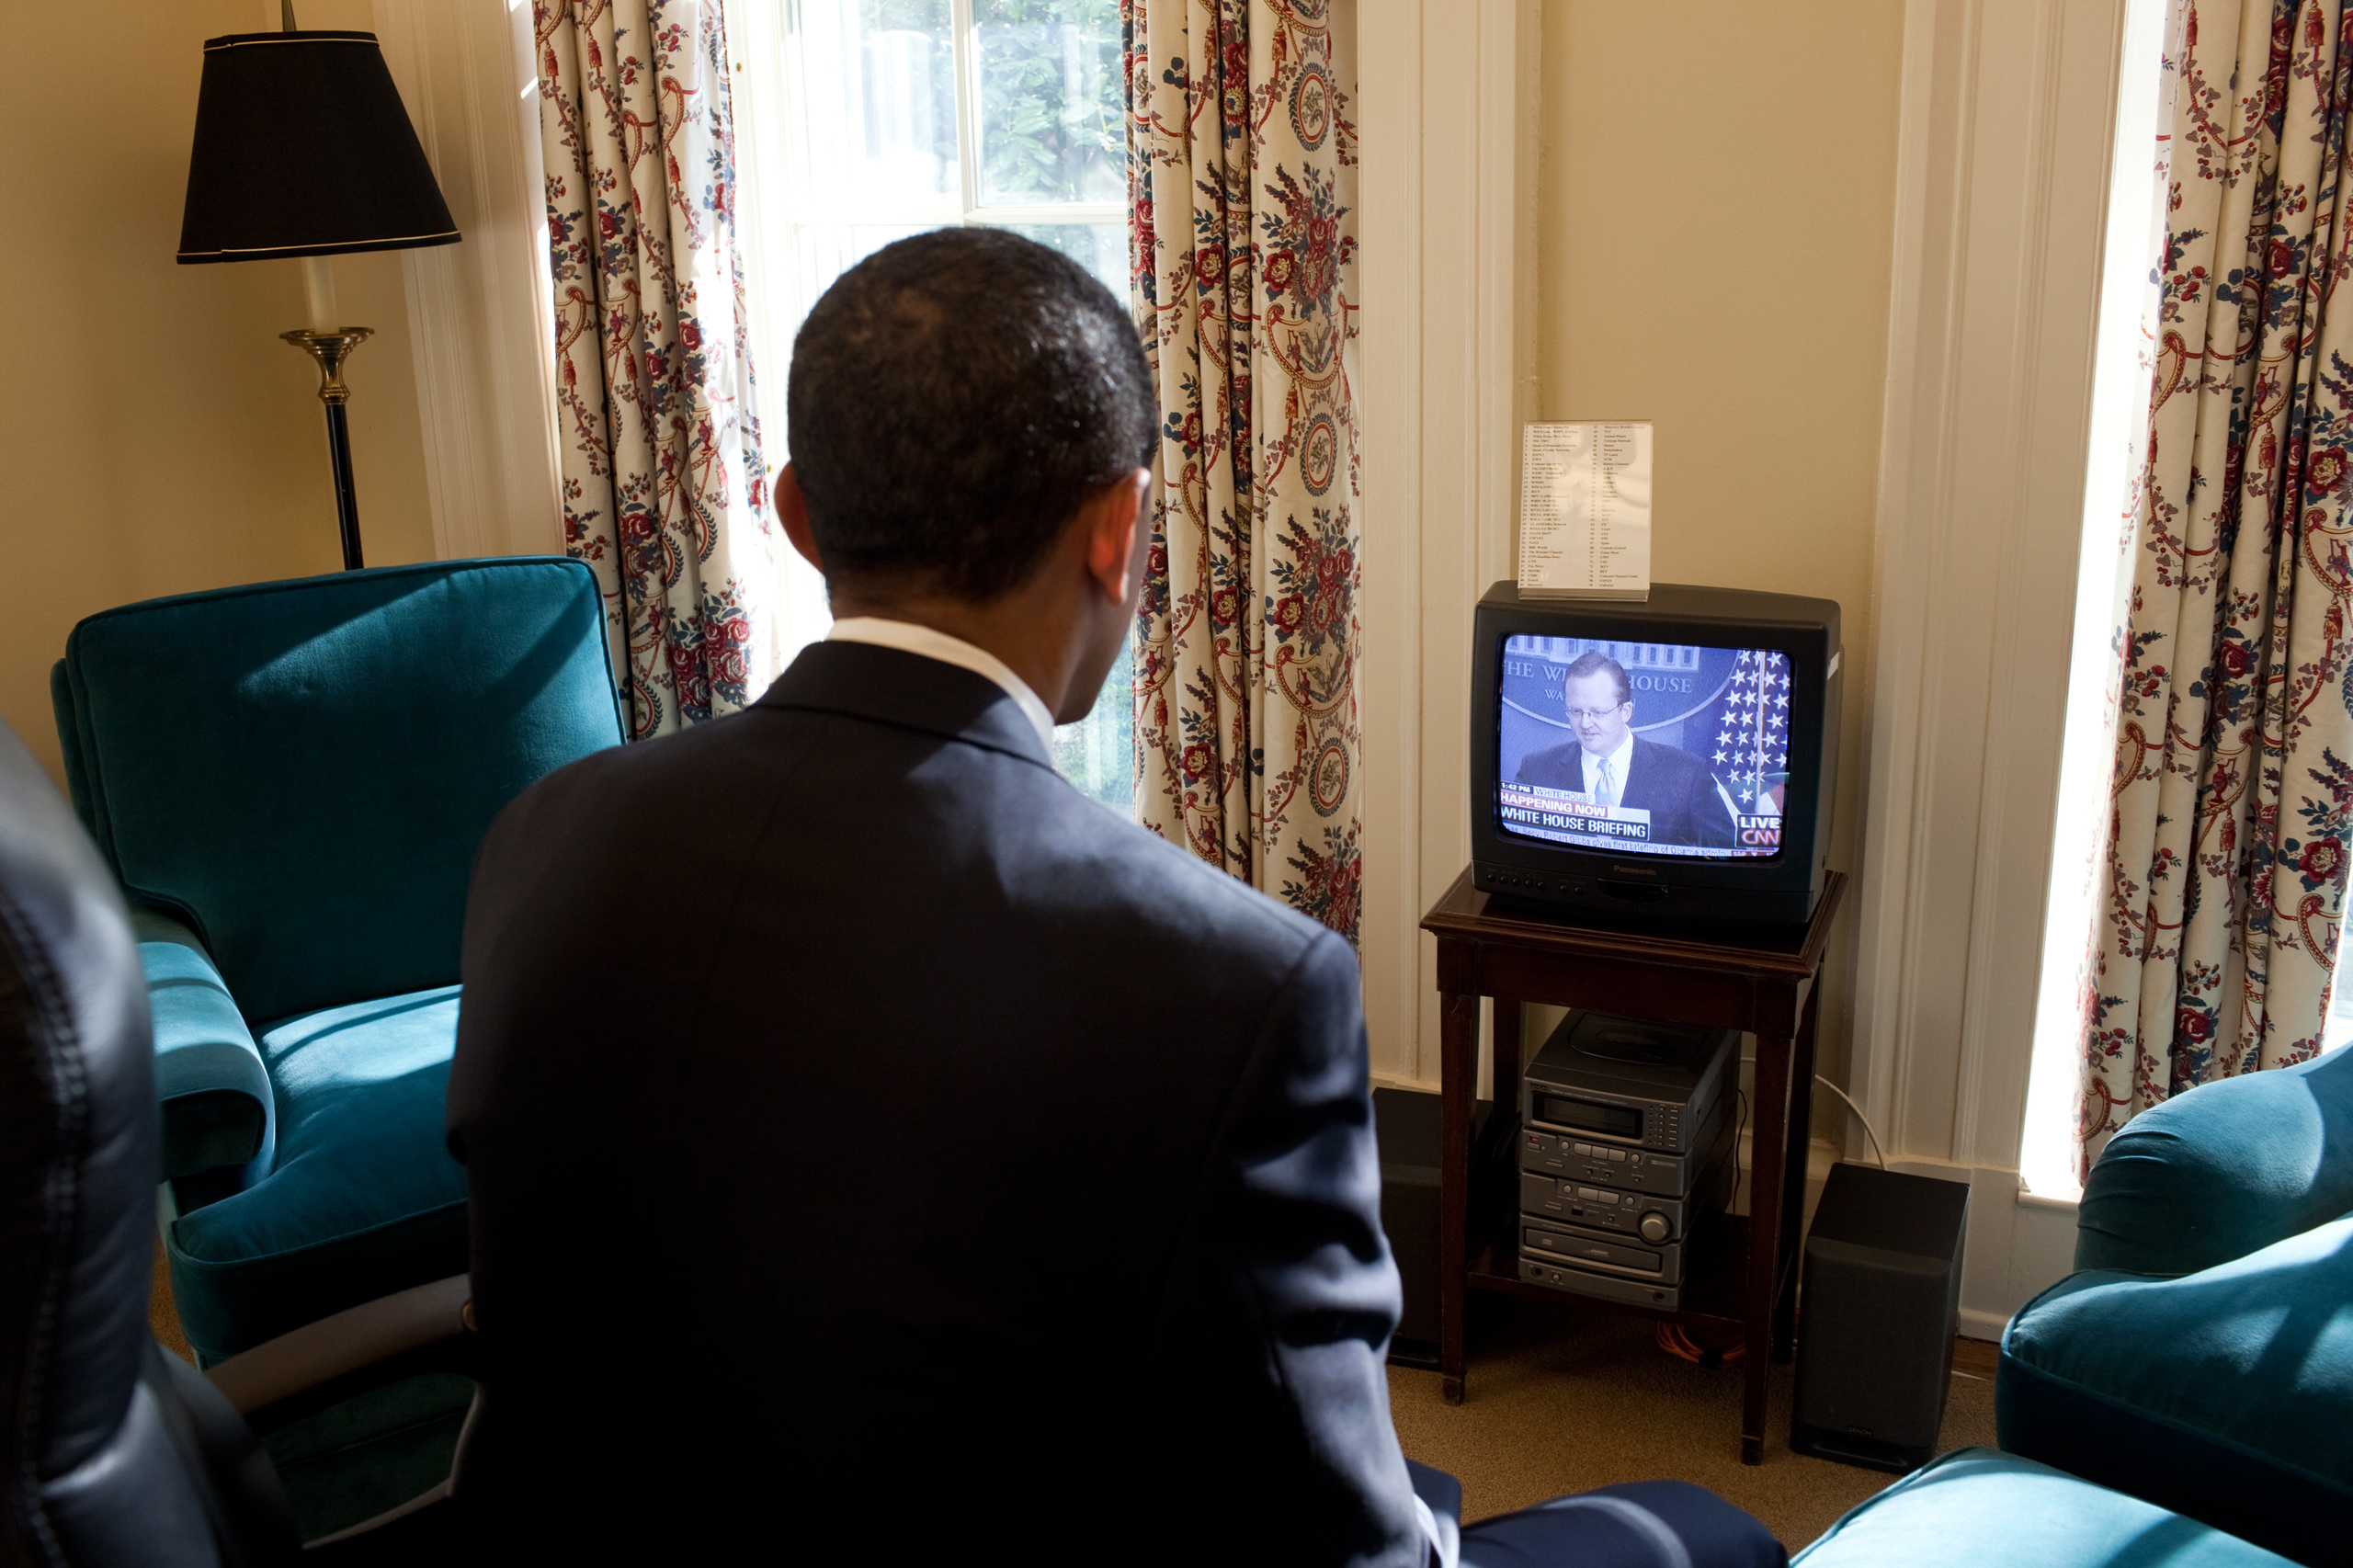 President Obama watches Press Secretary Robert Gibbs' first Press Briefing on television, in his private study off the Oval Office, on Jan. 22, 2009.